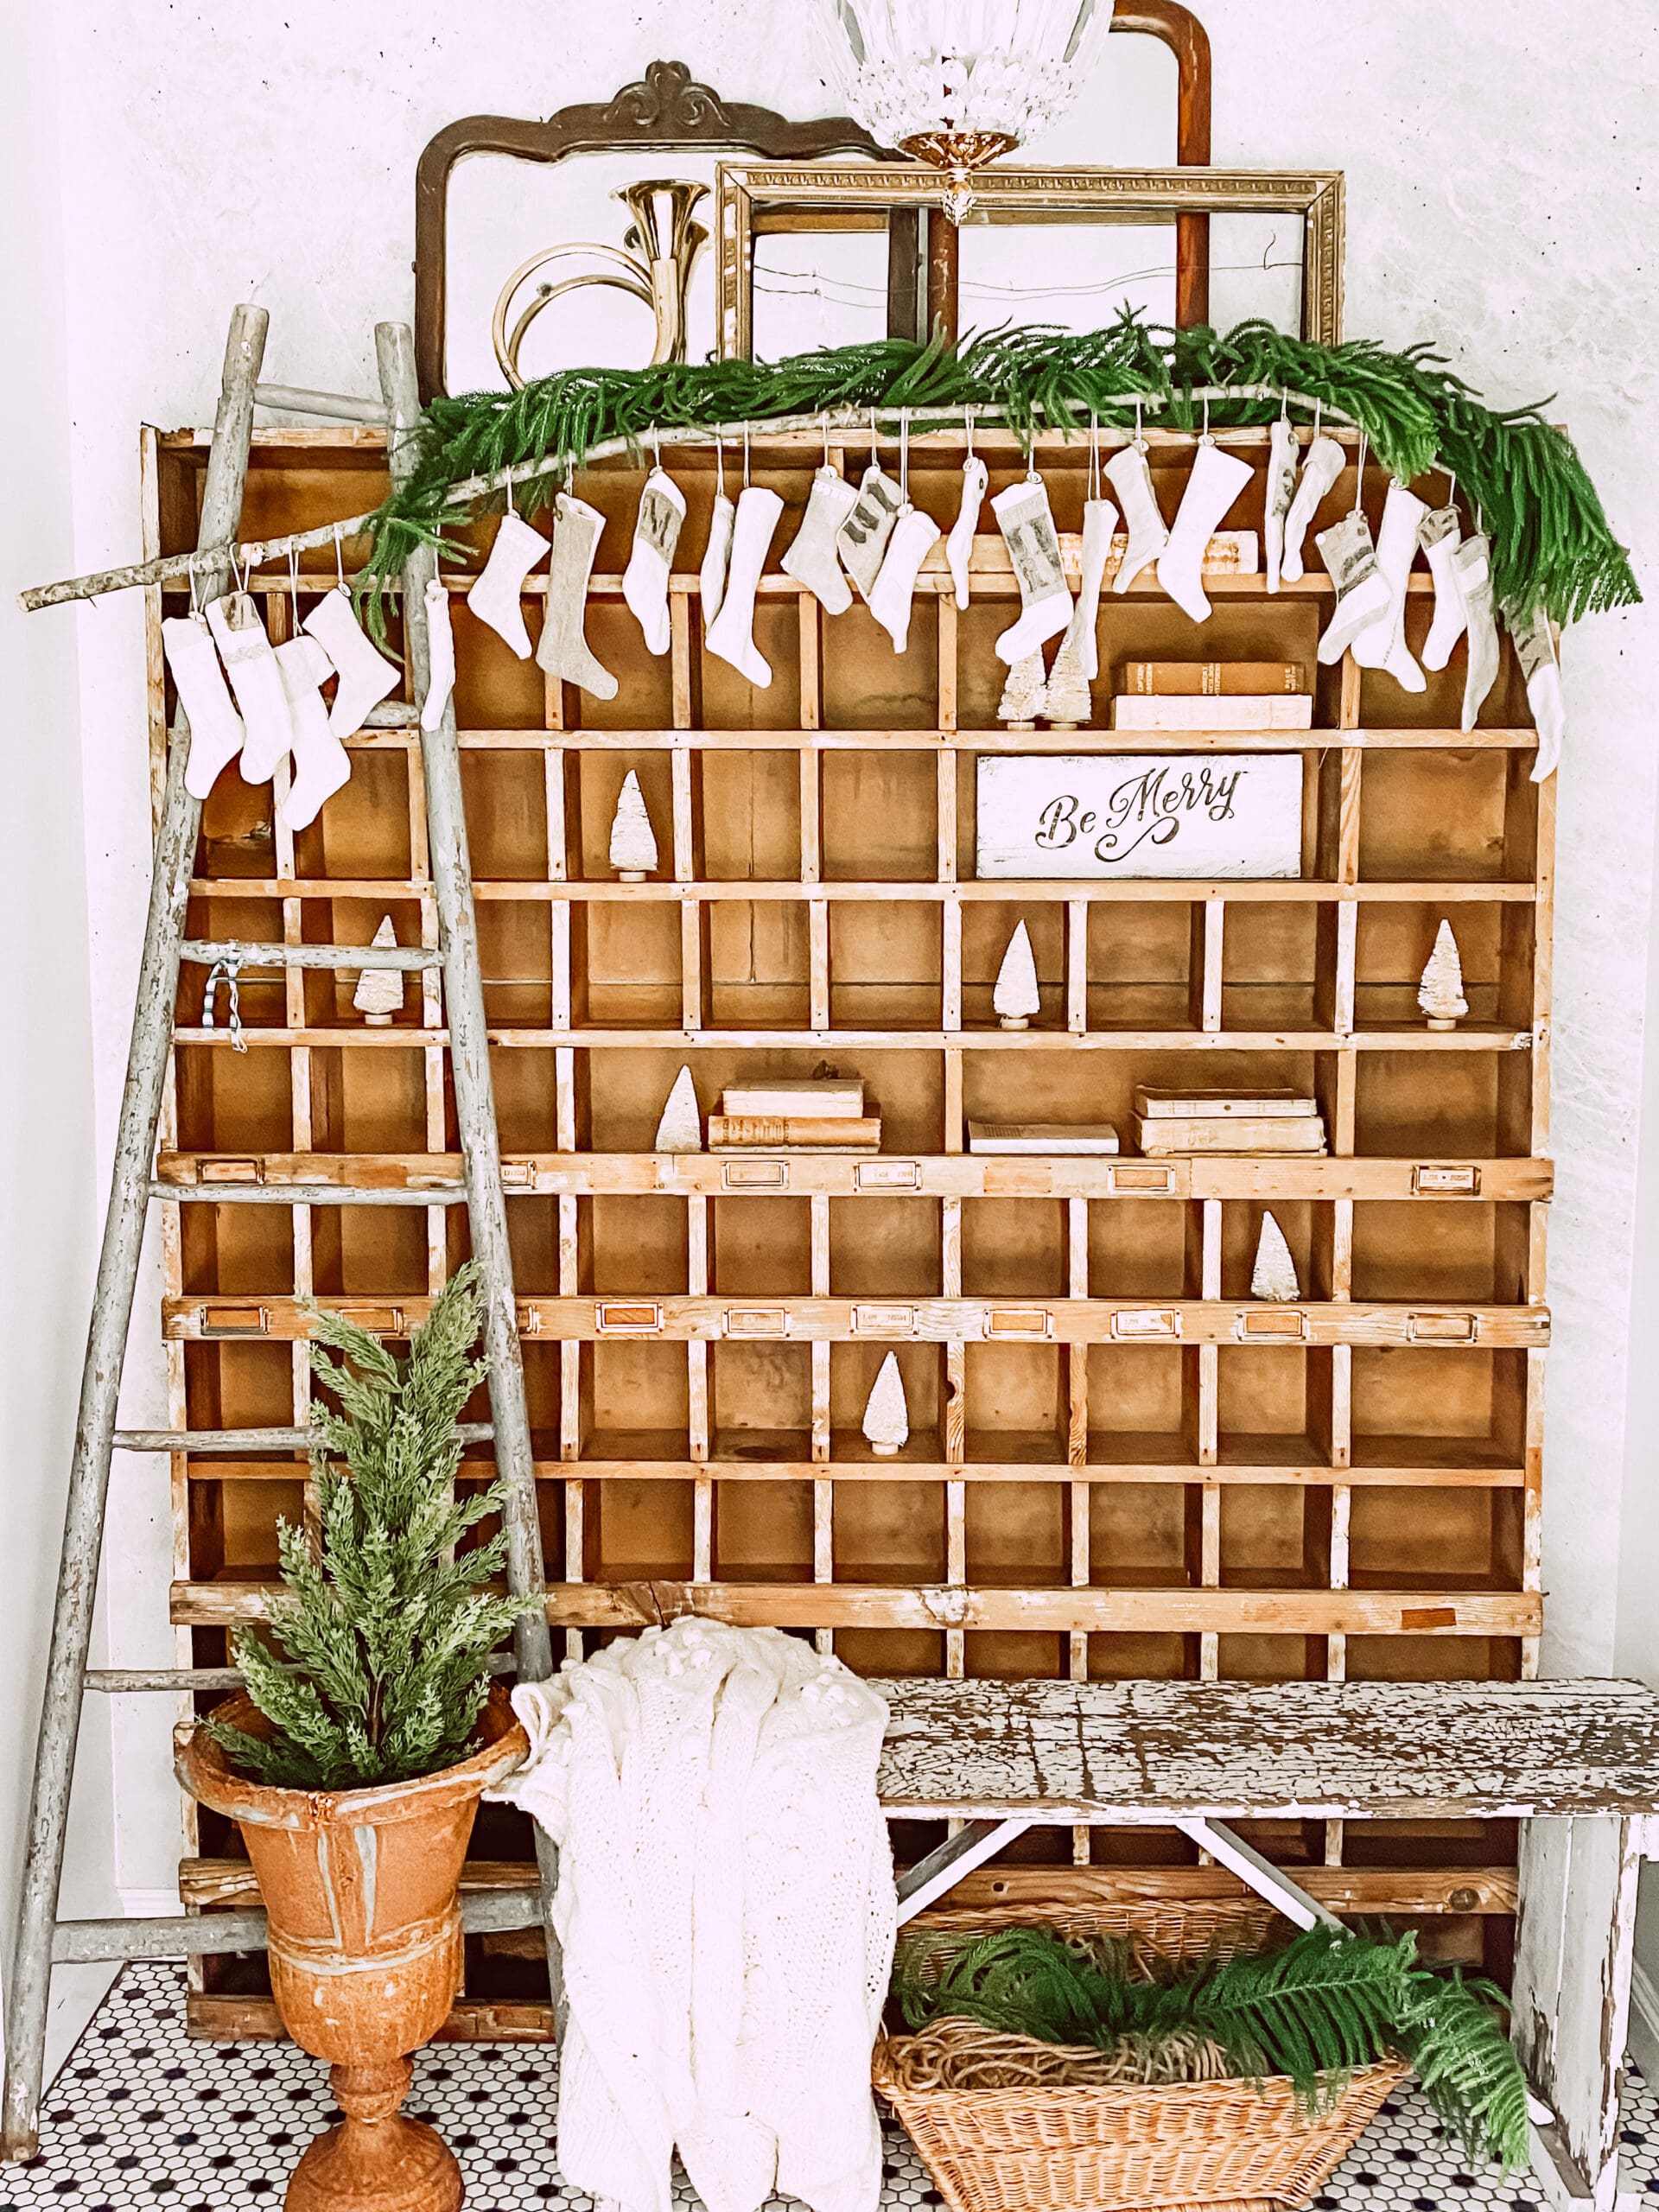 ladder leaning against wooden cubbies that are styled with stockings and Christmas greenery